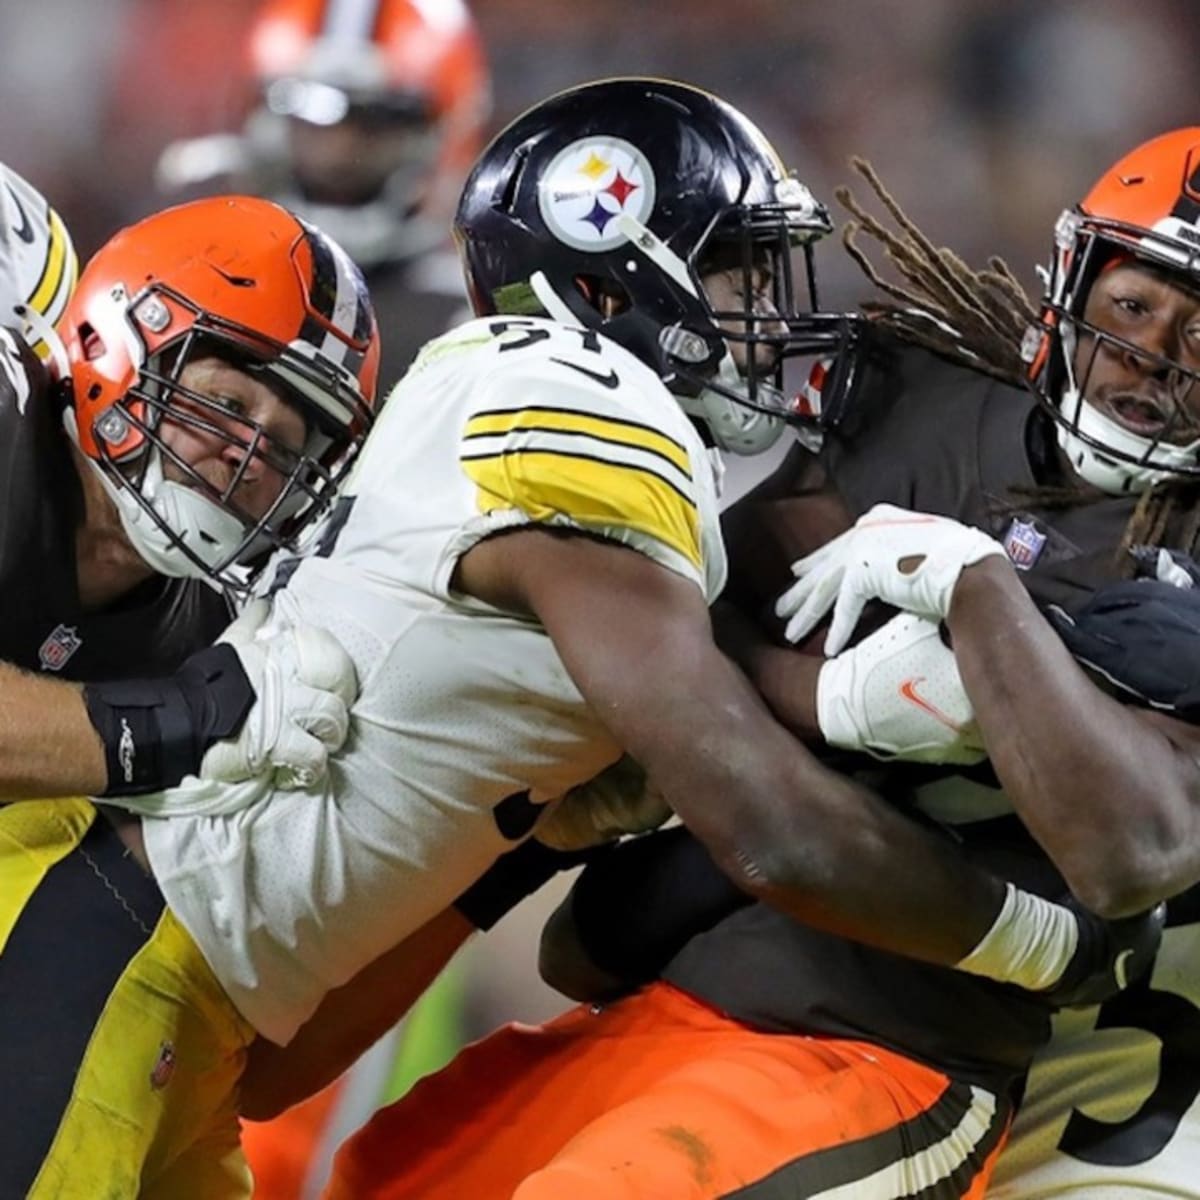 Colin Cowherd: Steelers Will Make Playoffs over Ravens